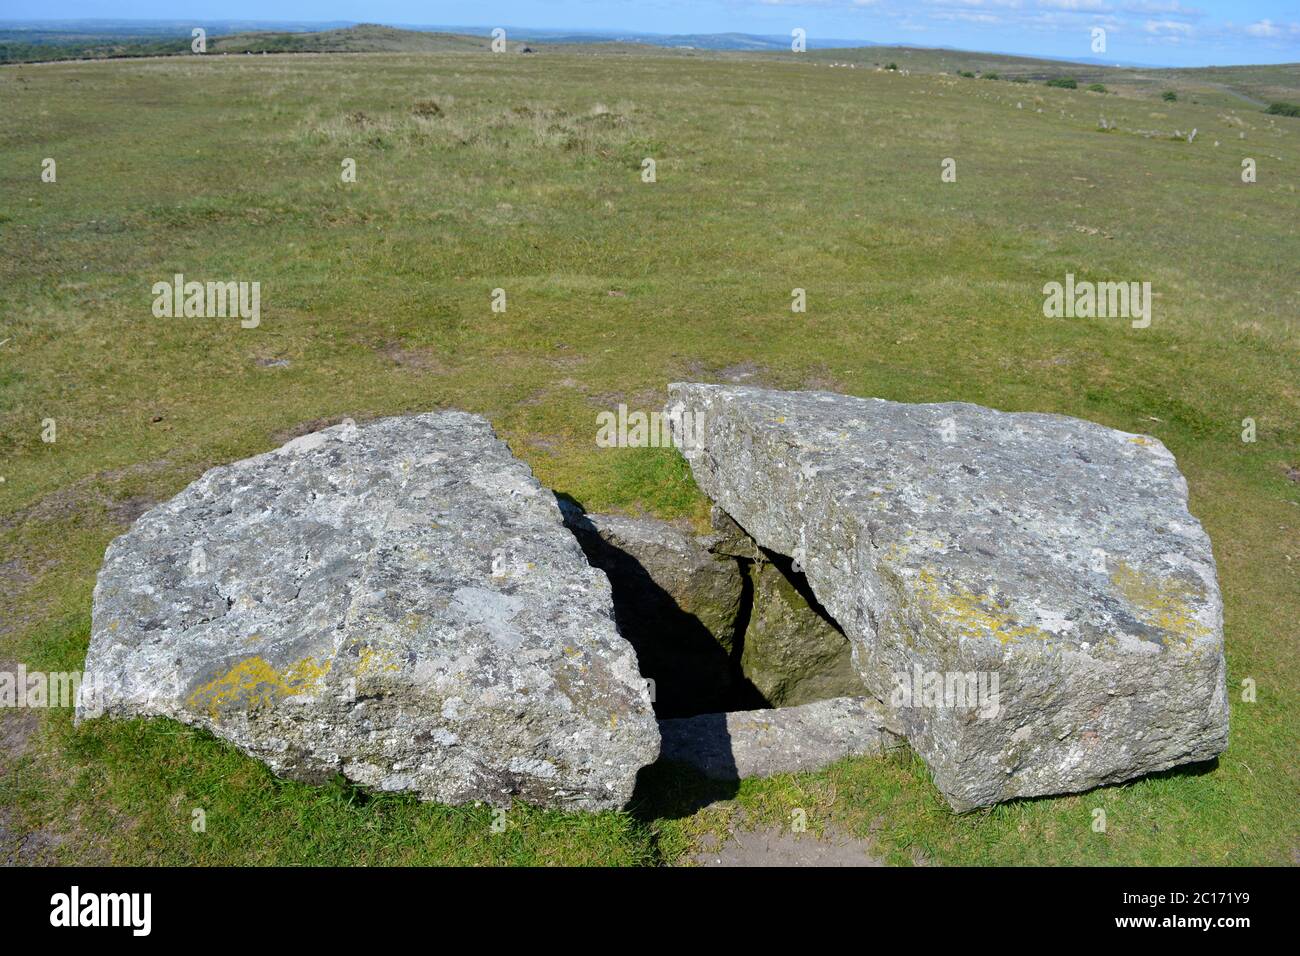 Stone cist, burial chamber associated with the Neolithic to Middle Bronze Age settlement site, Merrivale, Dartmoor National Park, Devon, UK Stock Photo